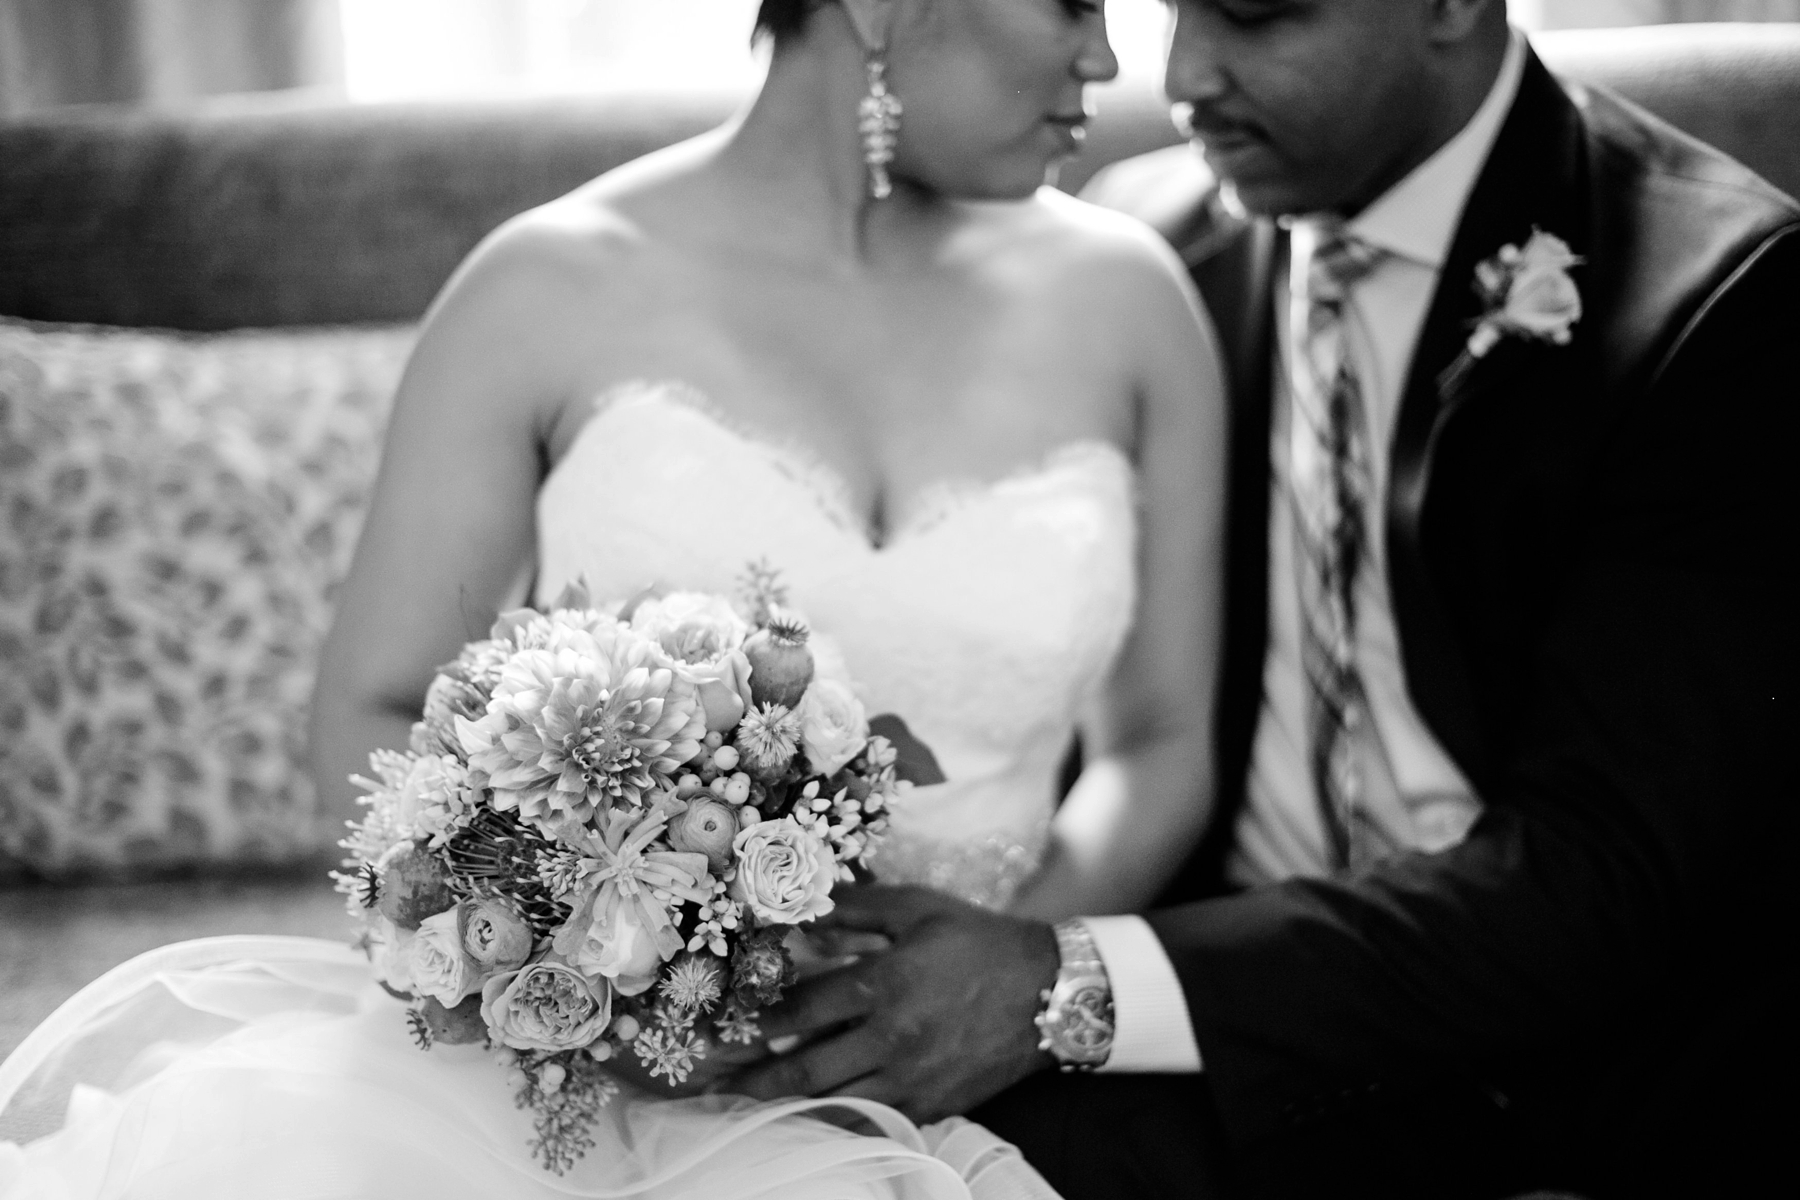 Black and white wedding portrait by Elle Danielle Photography